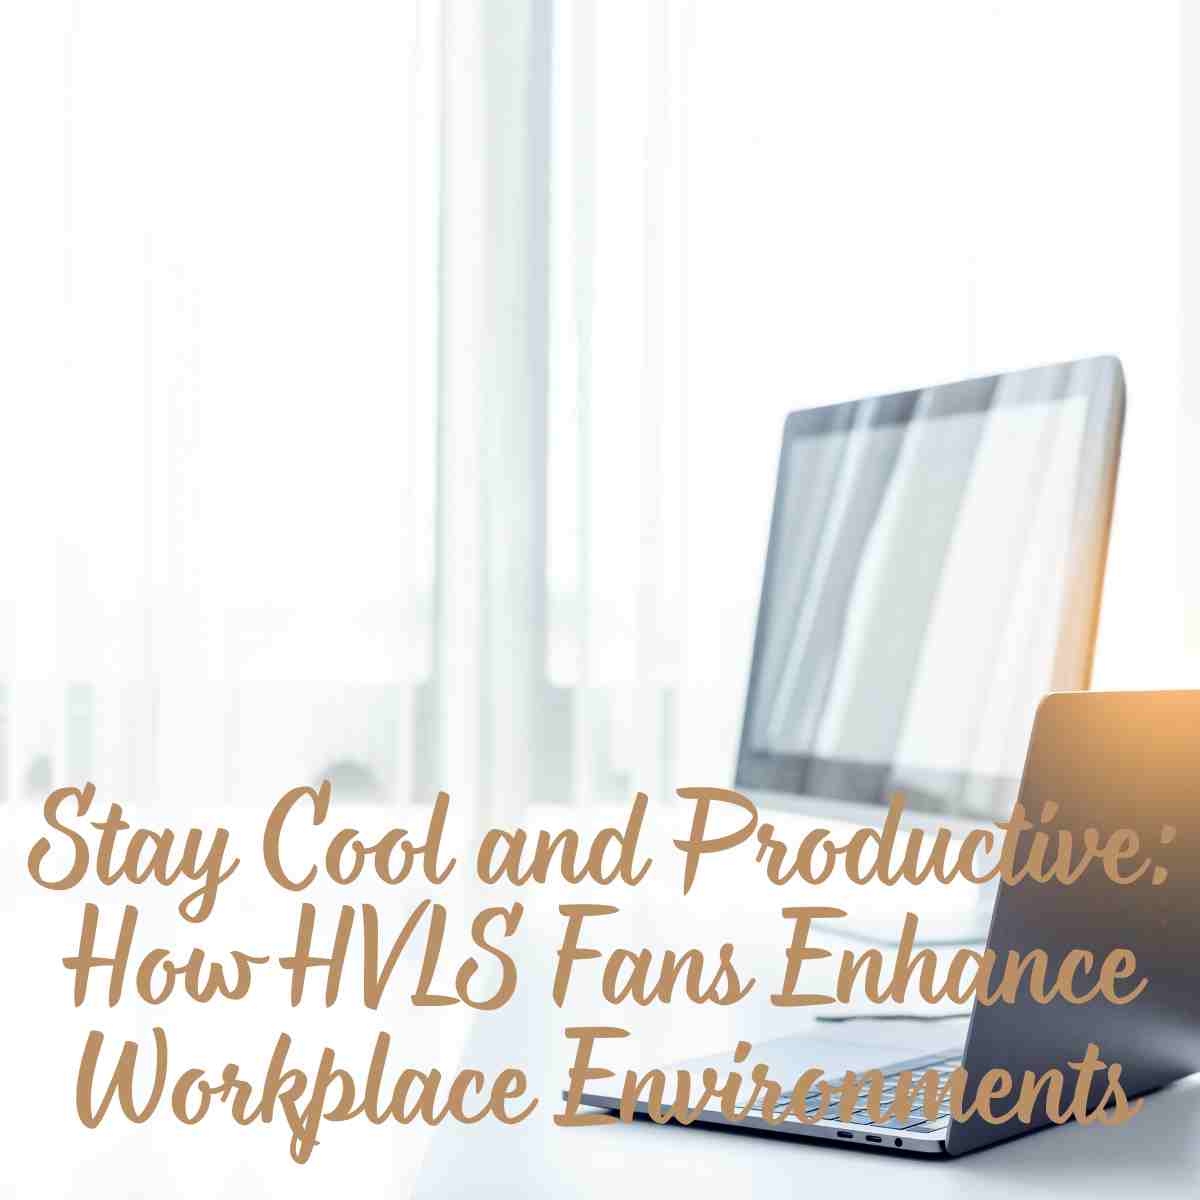 How HVLS Fans Enhance Workplace Environments